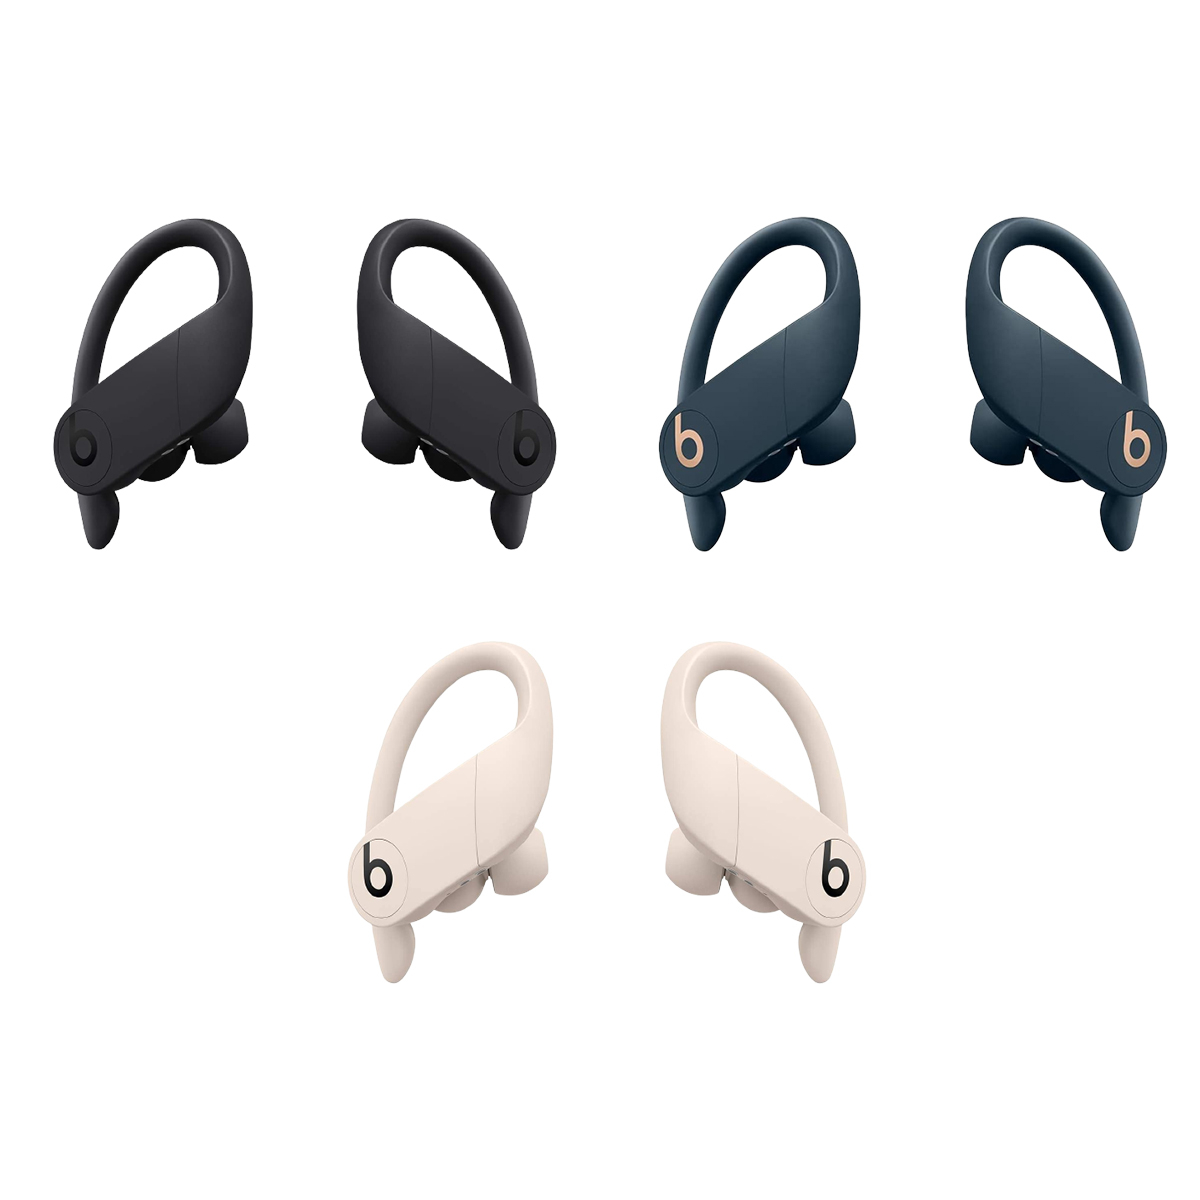 Save $100 on Beats Powerbeats Pro Earbuds 5-Star Reviews - Online